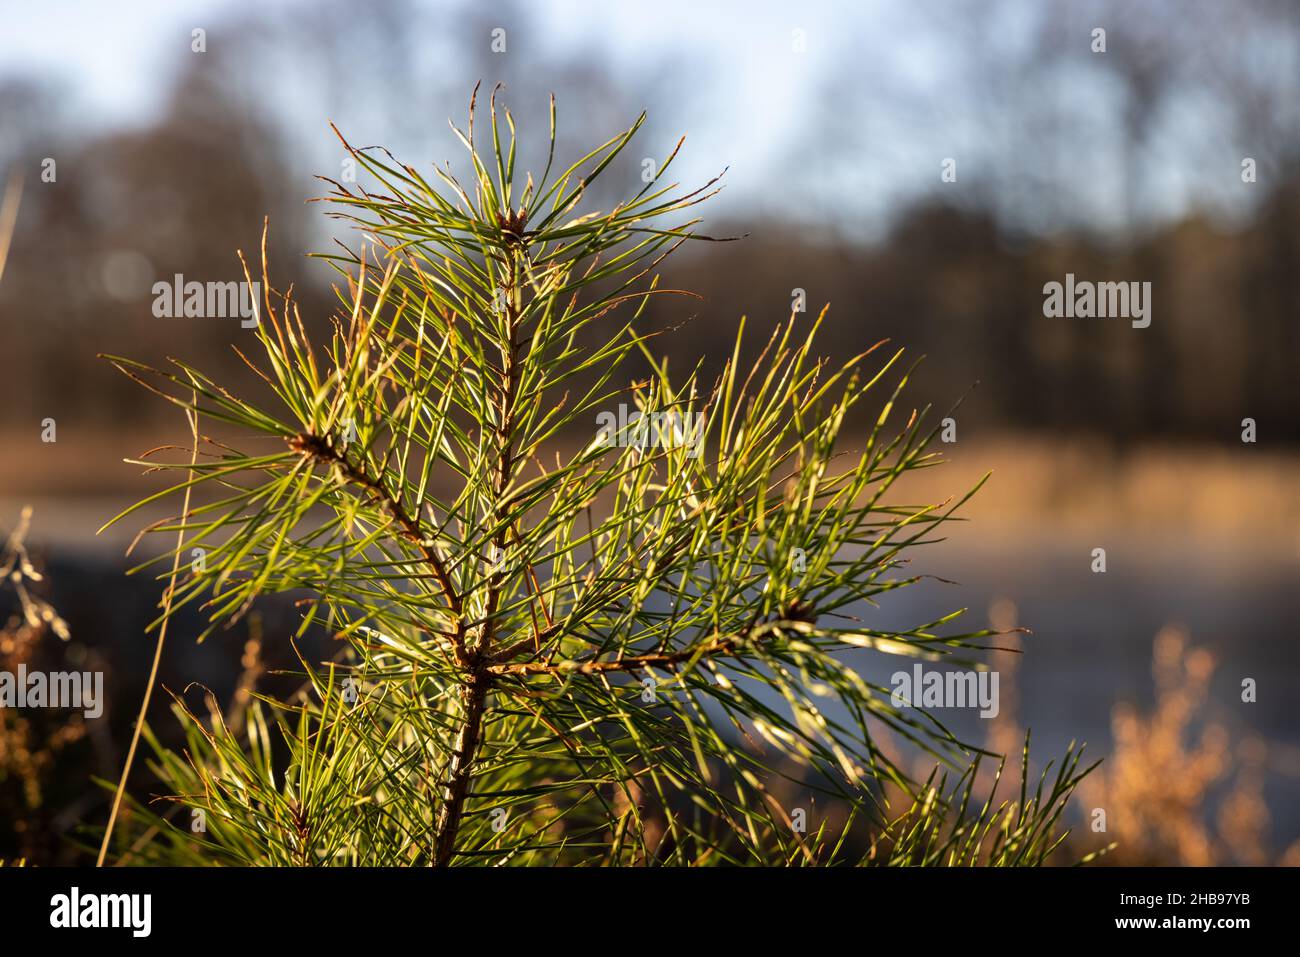 Soft focused young Pine buds. Pinus sylvestris, pinus nigra, branches of mountain pine. Pinus tree on a sunny day with the backlight of sun Stock Photo